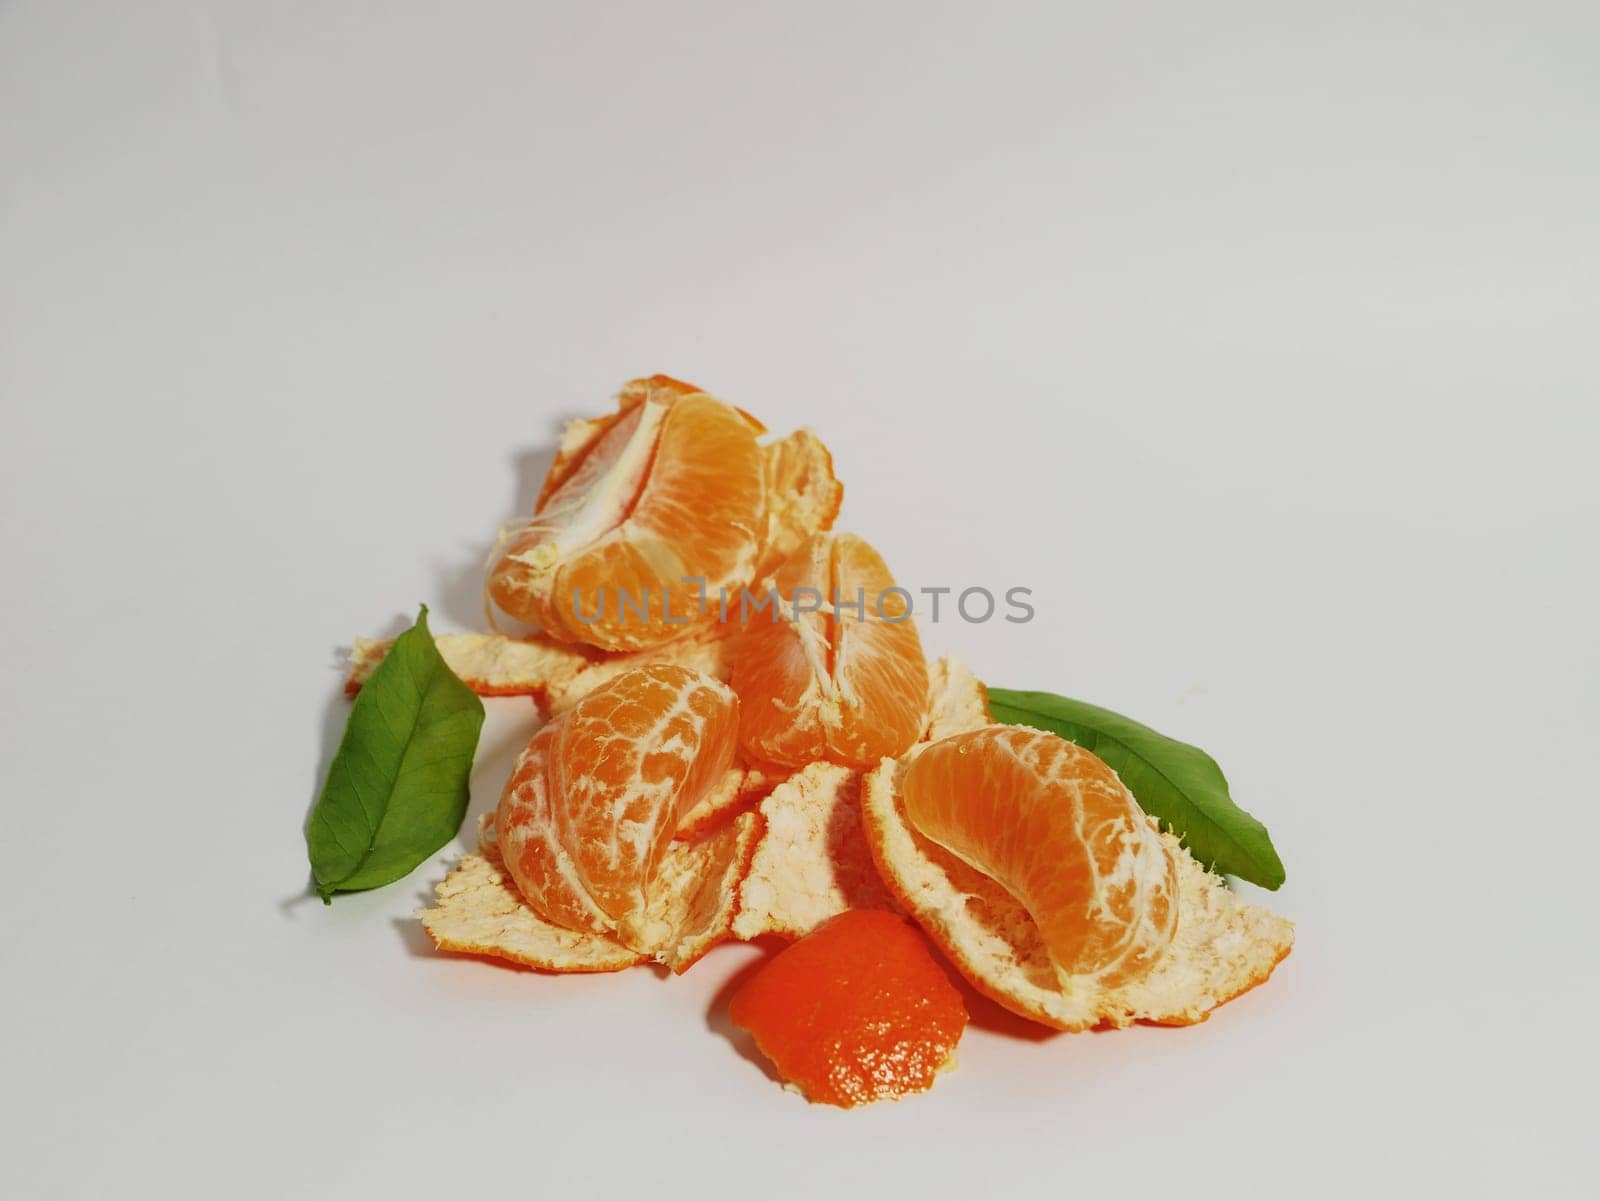 Slices of fresh tangerine along with peel and leaves on a white paper background. High quality photo